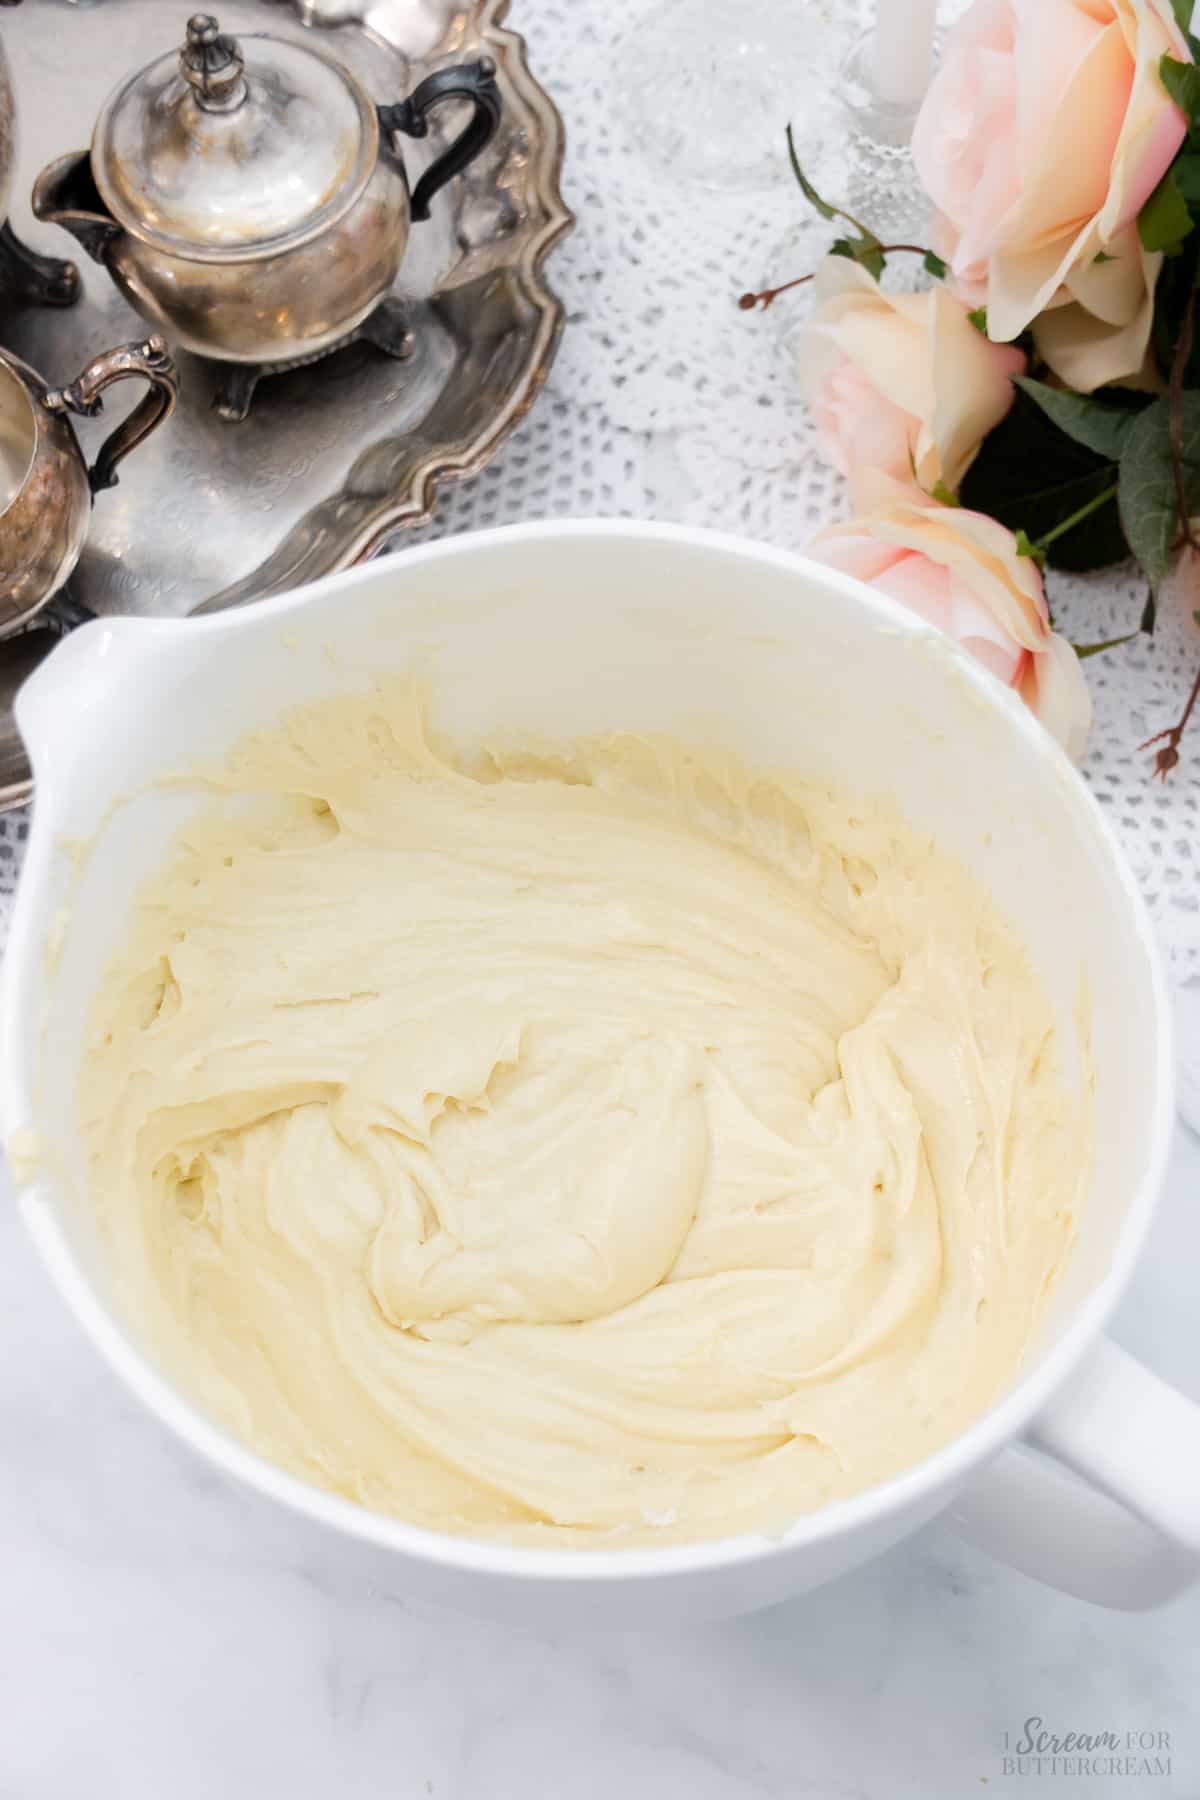 Final vanilla cake batter mixed in a white mixing bowl.